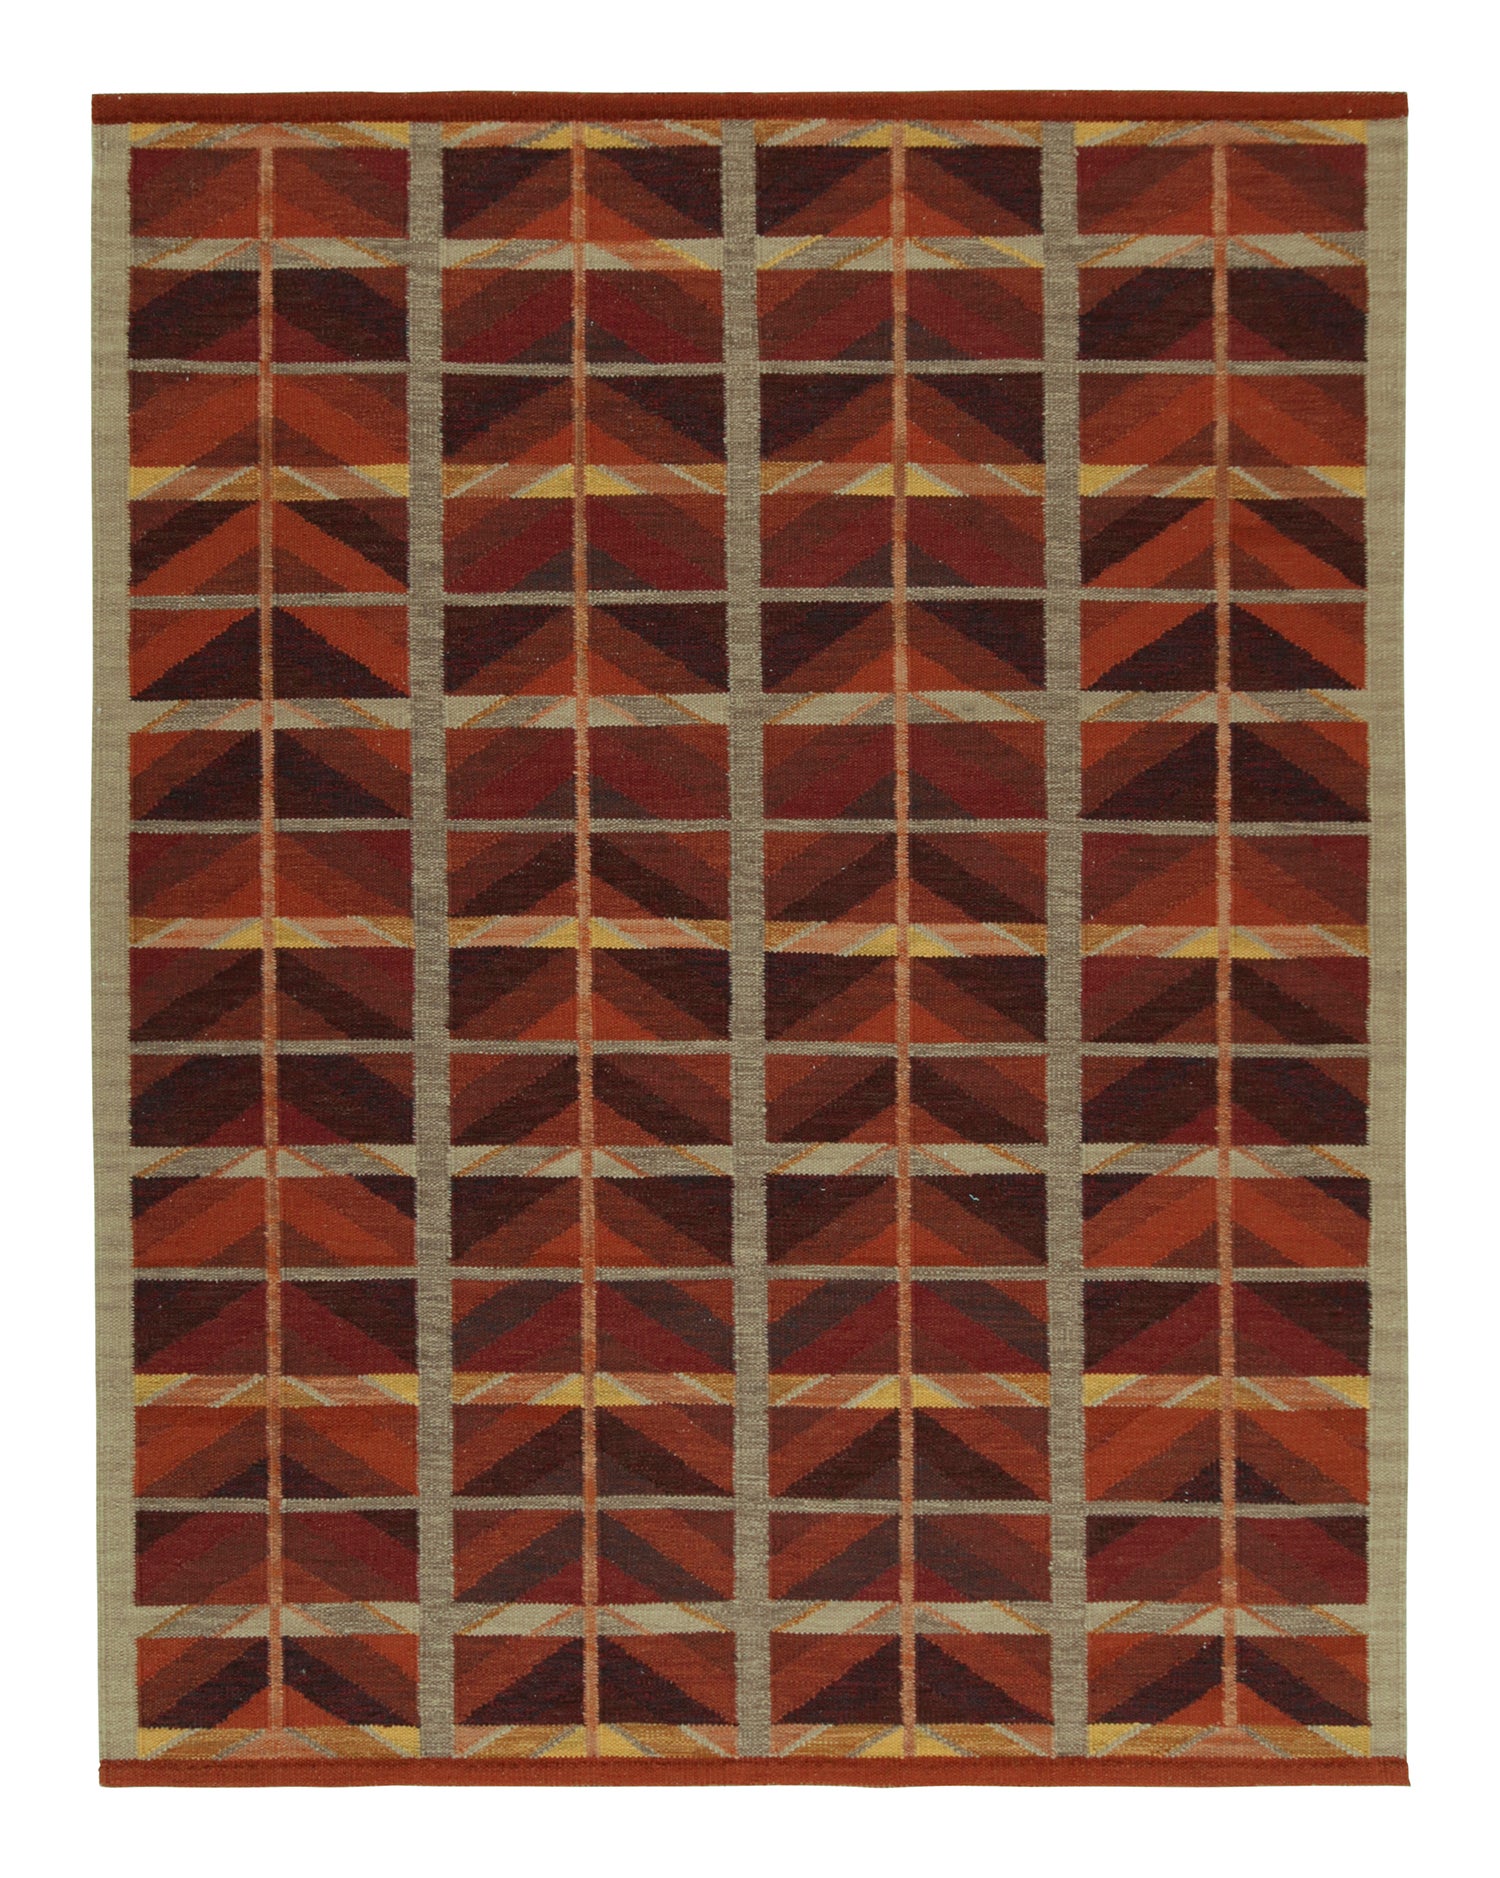 Rug & Kilim’s Scandinavian Style Kilim in Red, Ochre and Gray Geometric Pattern For Sale